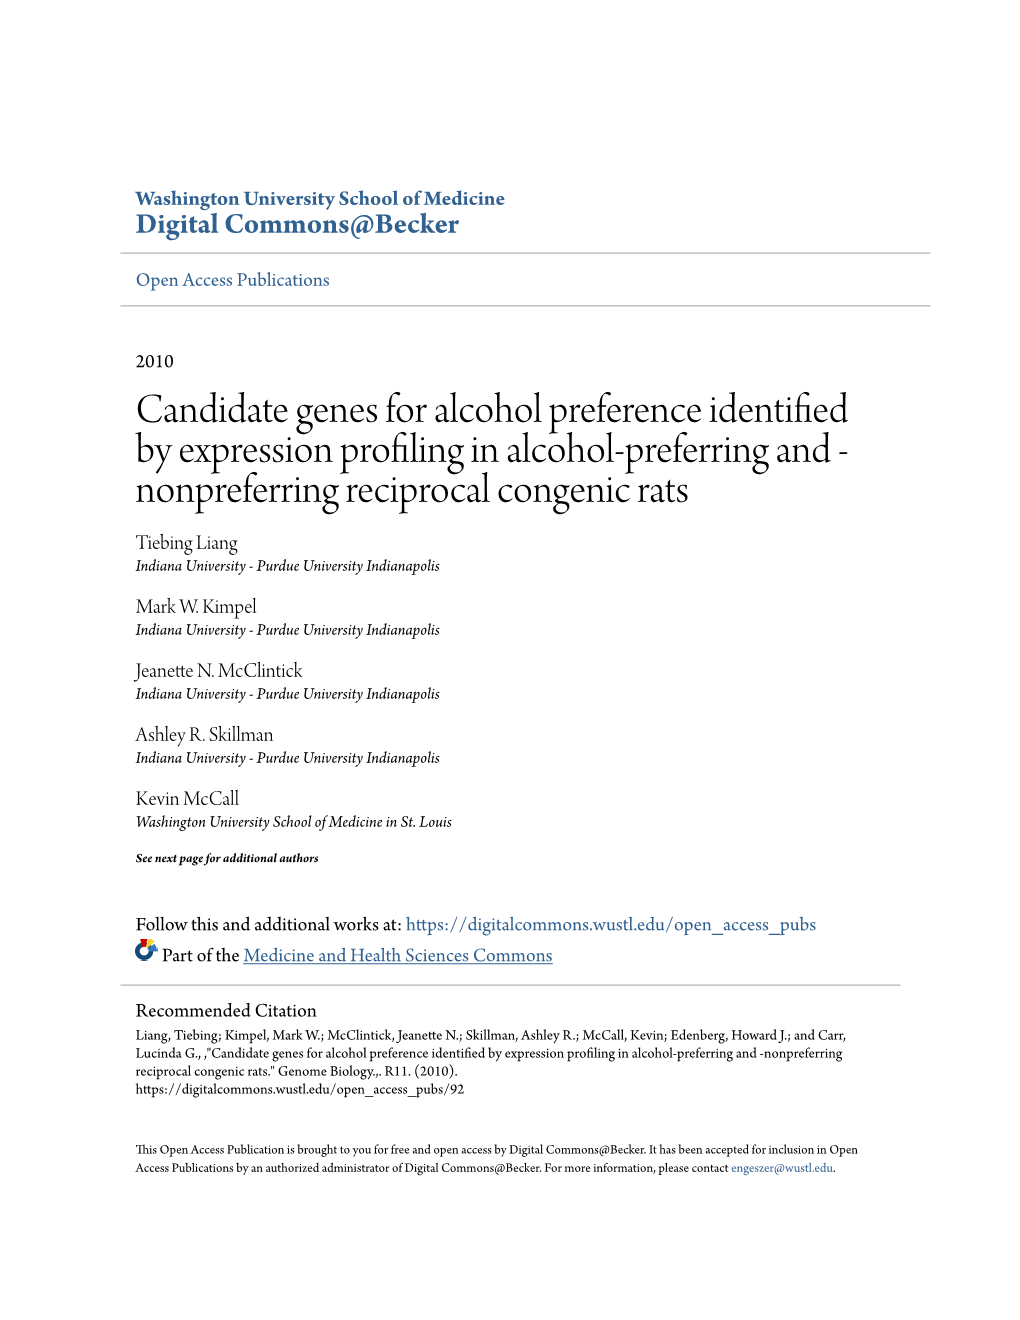 Candidate Genes for Alcohol Preference Identified by Expression